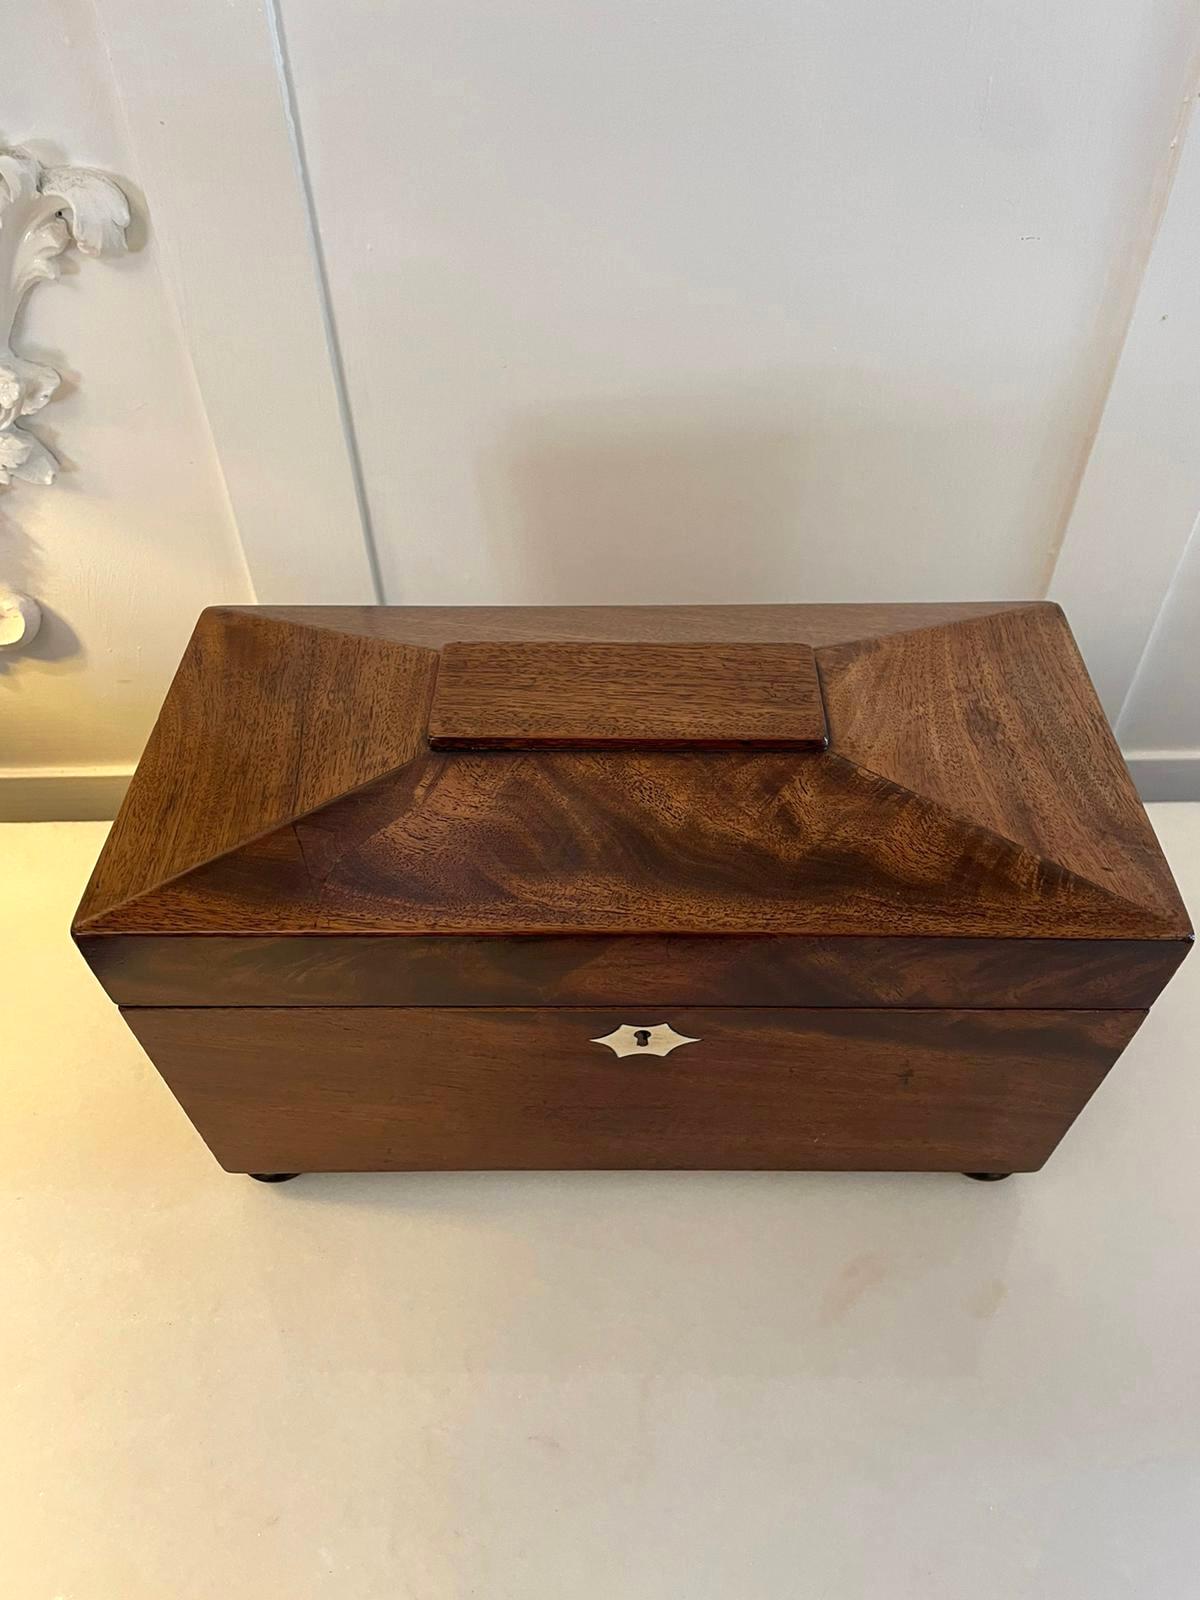 Other Antique Victorian Quality Mahogany Tea Caddy